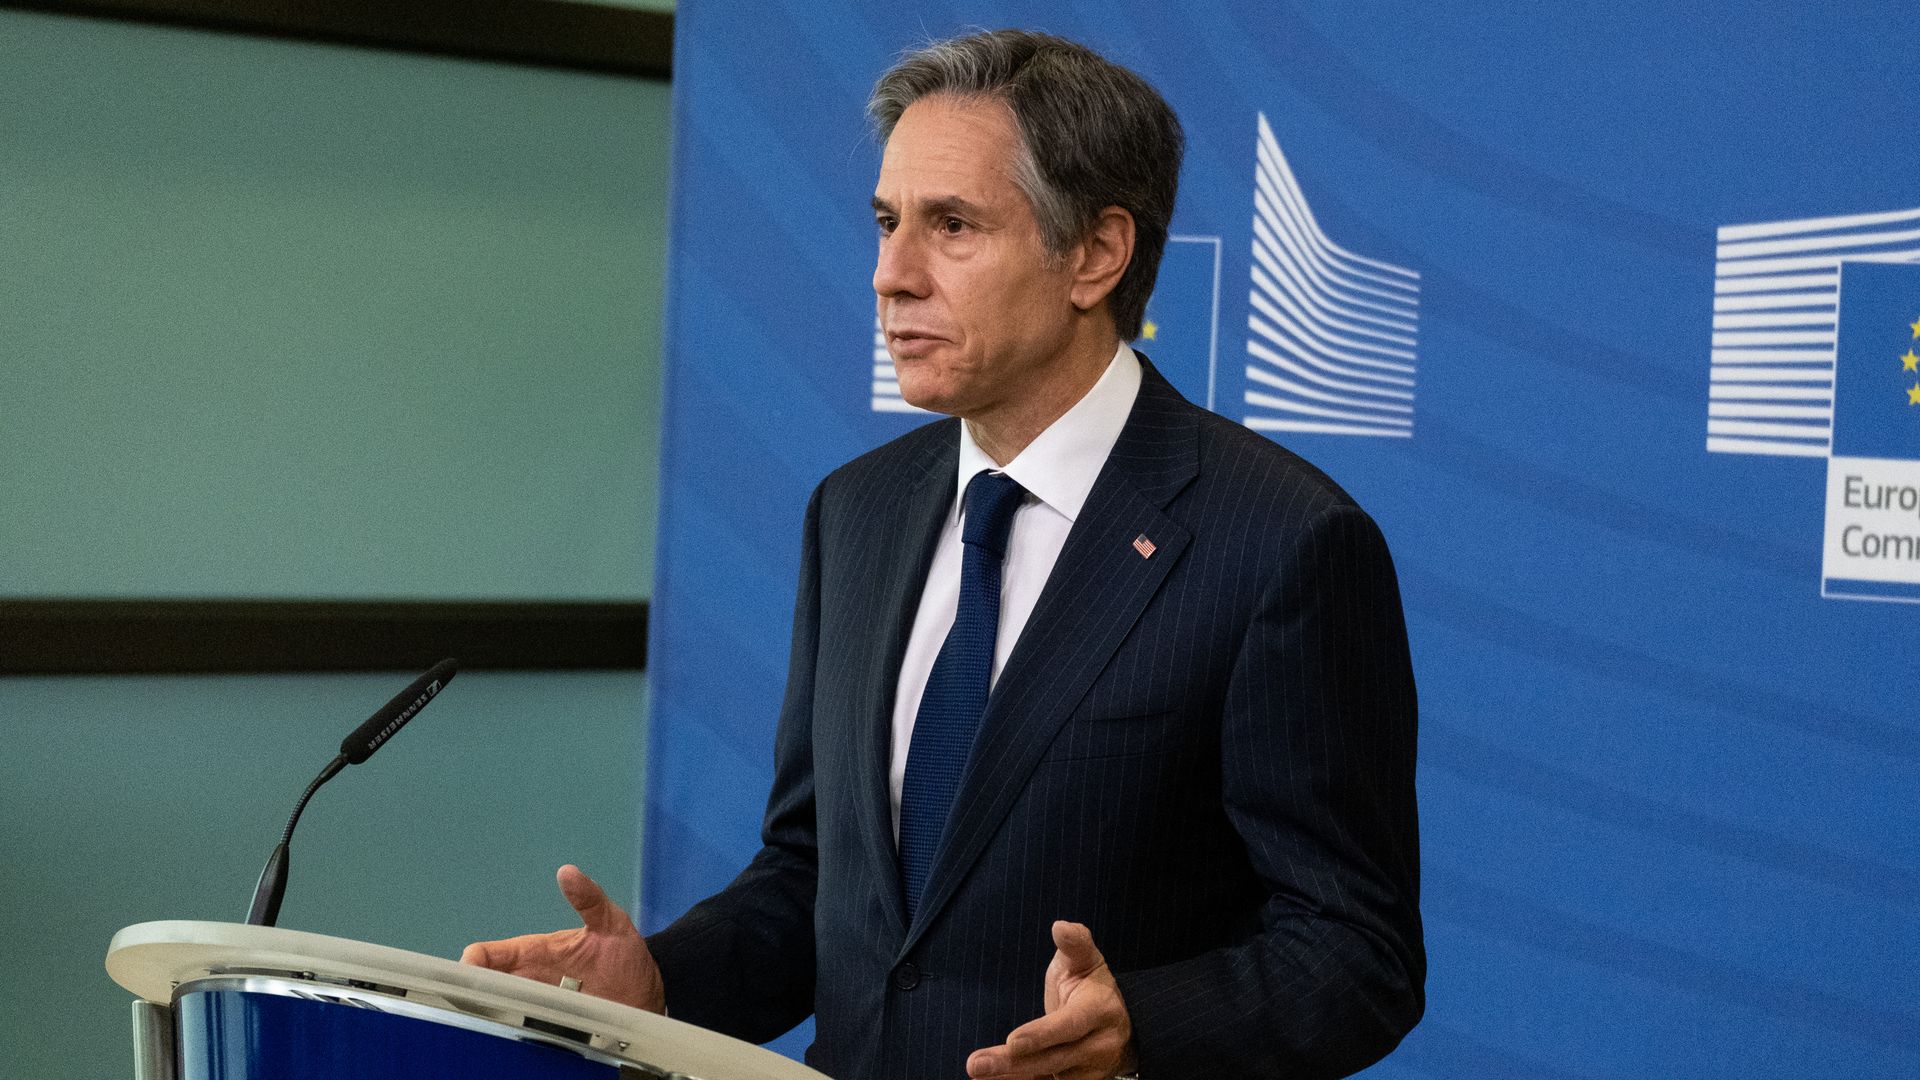 Antony Blinken, U.S. secretary of state, speaks during a news conference in the Berlaymont building in Brussels, Belgium, on Wednesday, March 24